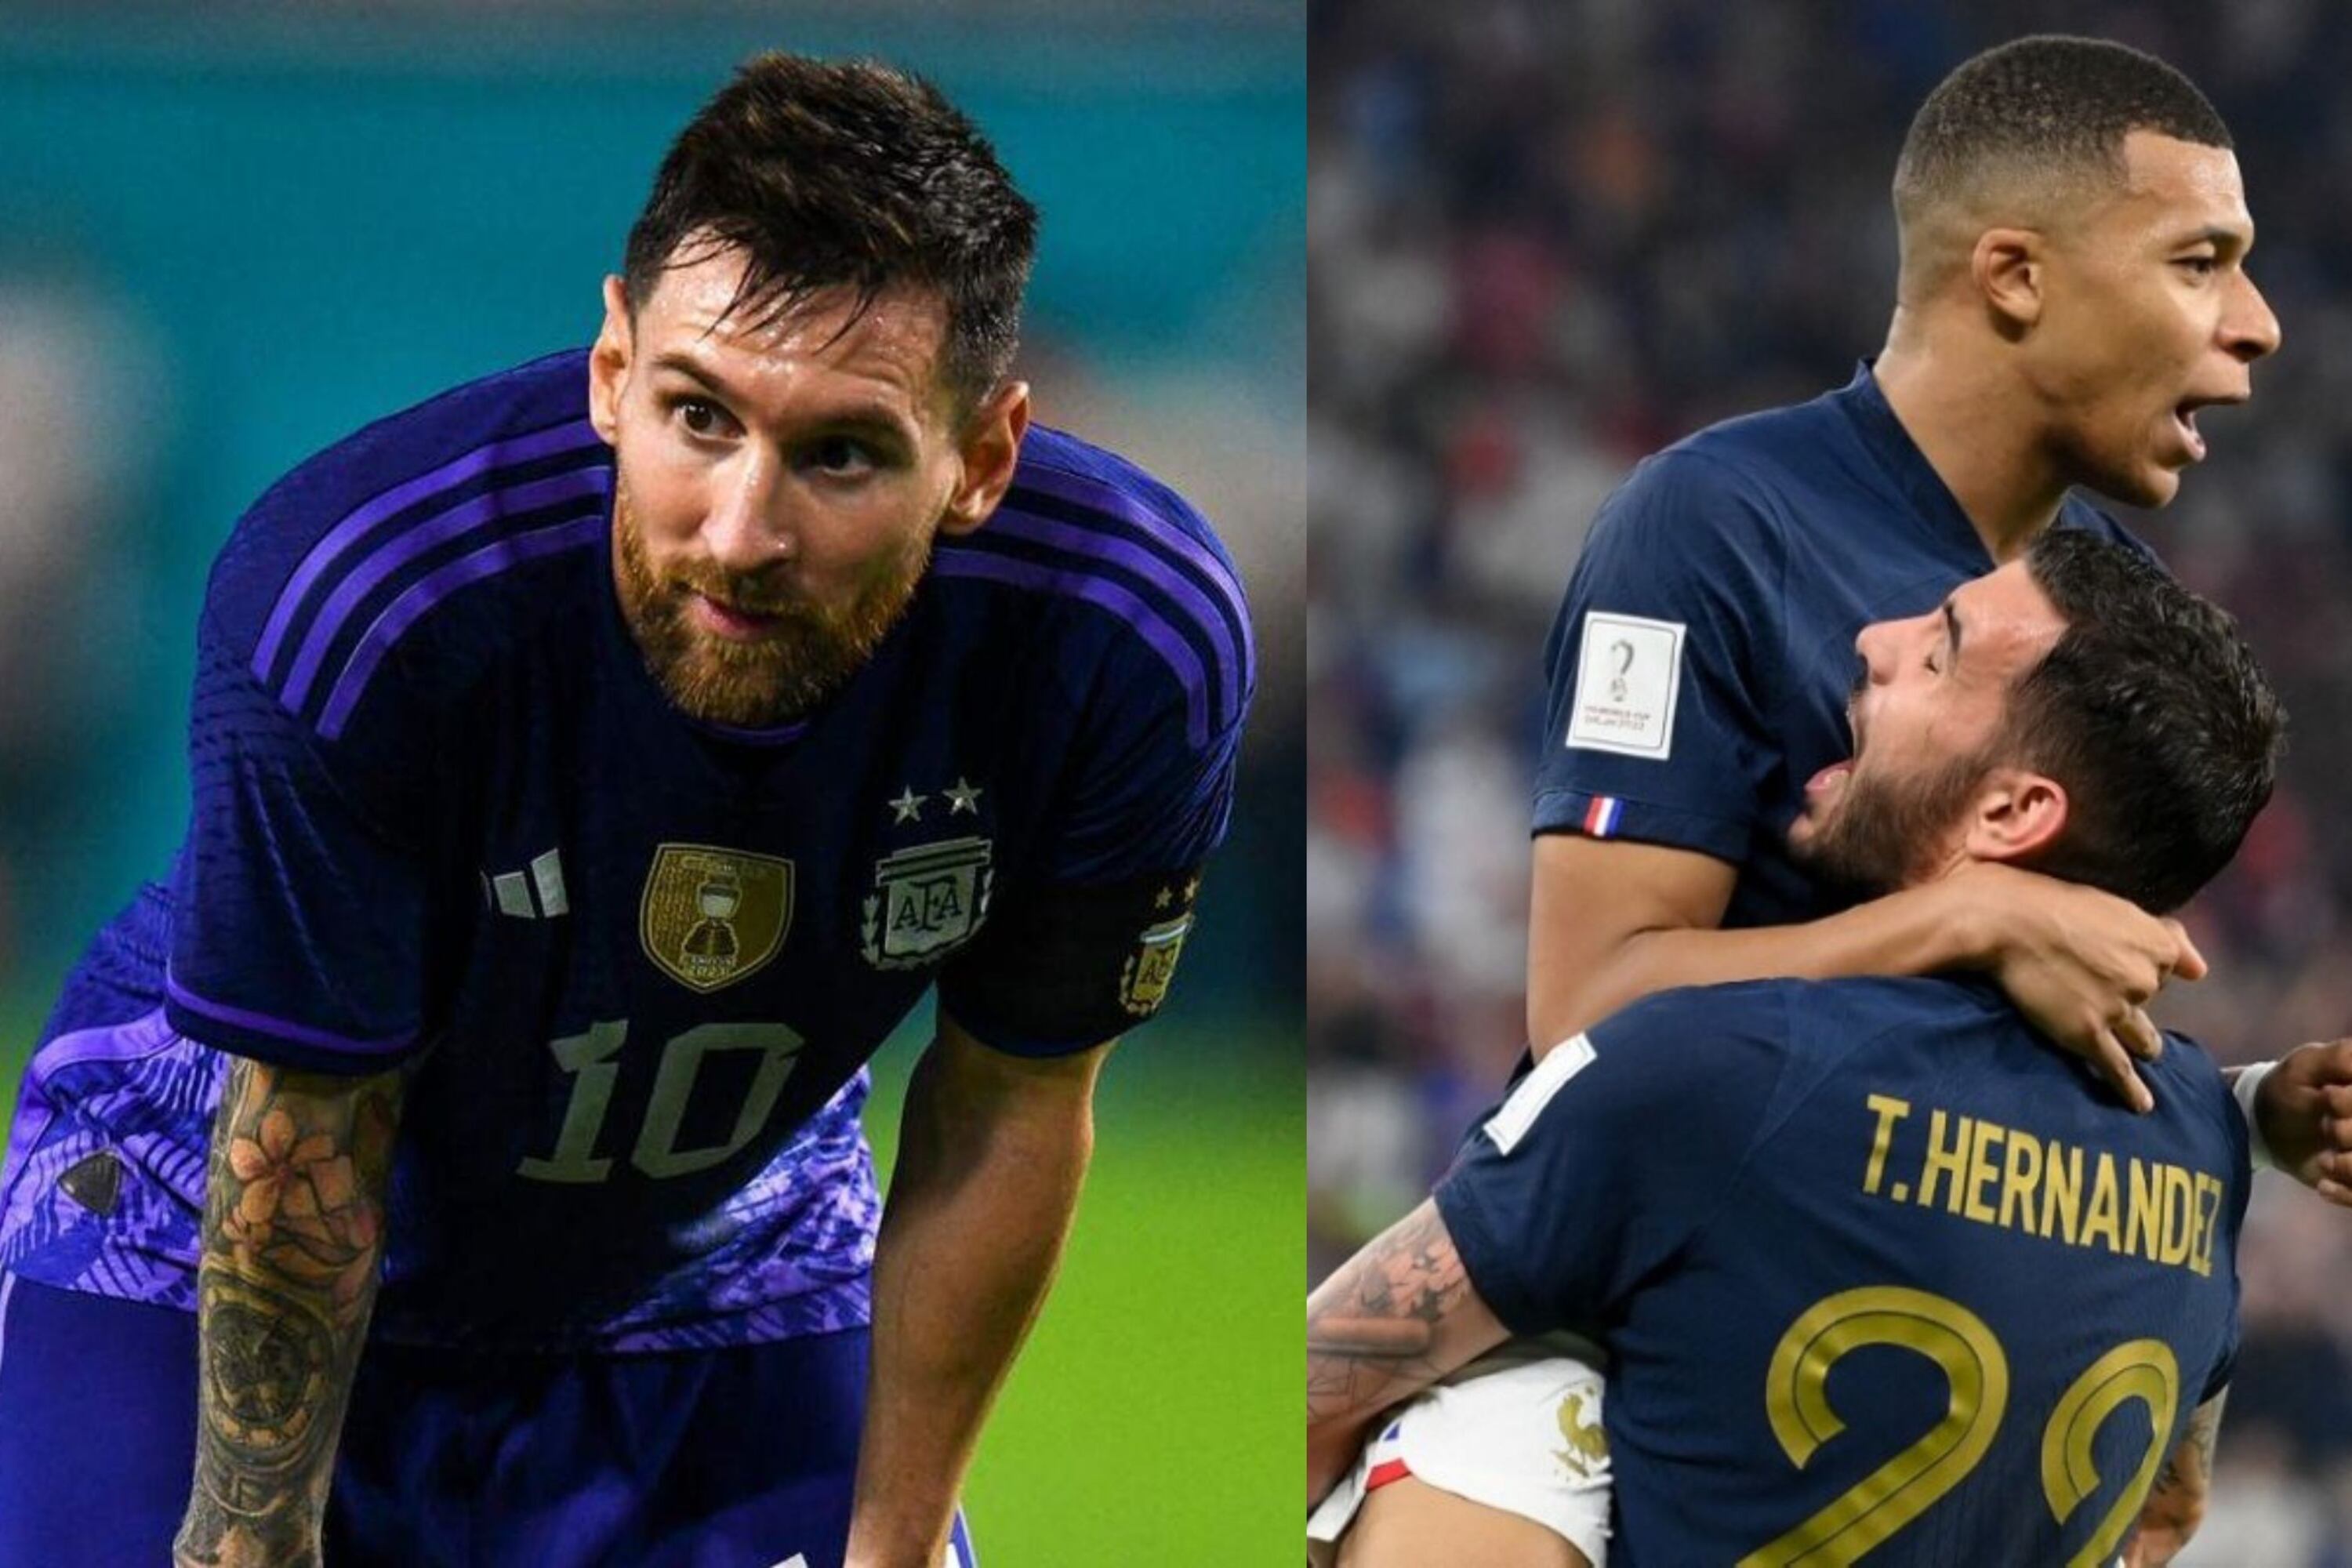 The harsh warning that Kylian Mbappé made to Lionel Messi and Argentina in Qatar 2022